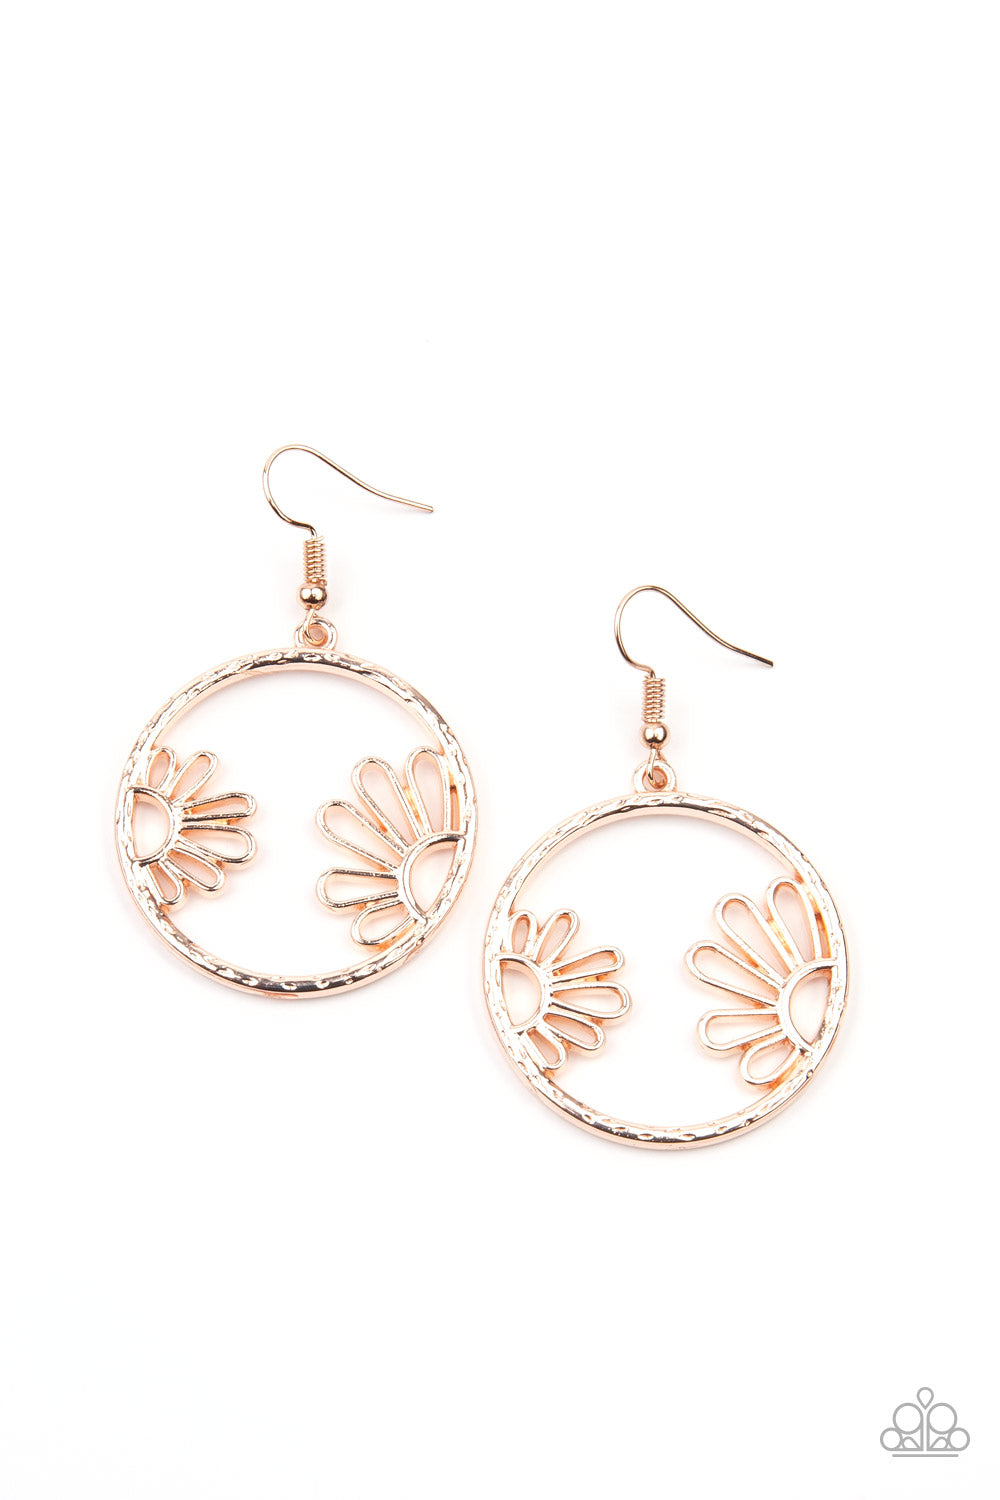 Demurely Daisy Rose Gold Earring - Paparazzi Accessories  A pair of airy daisies bloom inside a hammered rose gold hoop, creating a whimsically seasonal display. Earring attaches to a standard fishhook fitting.  All Paparazzi Accessories are lead free and nickel free!  Sold as one pair of earrings.